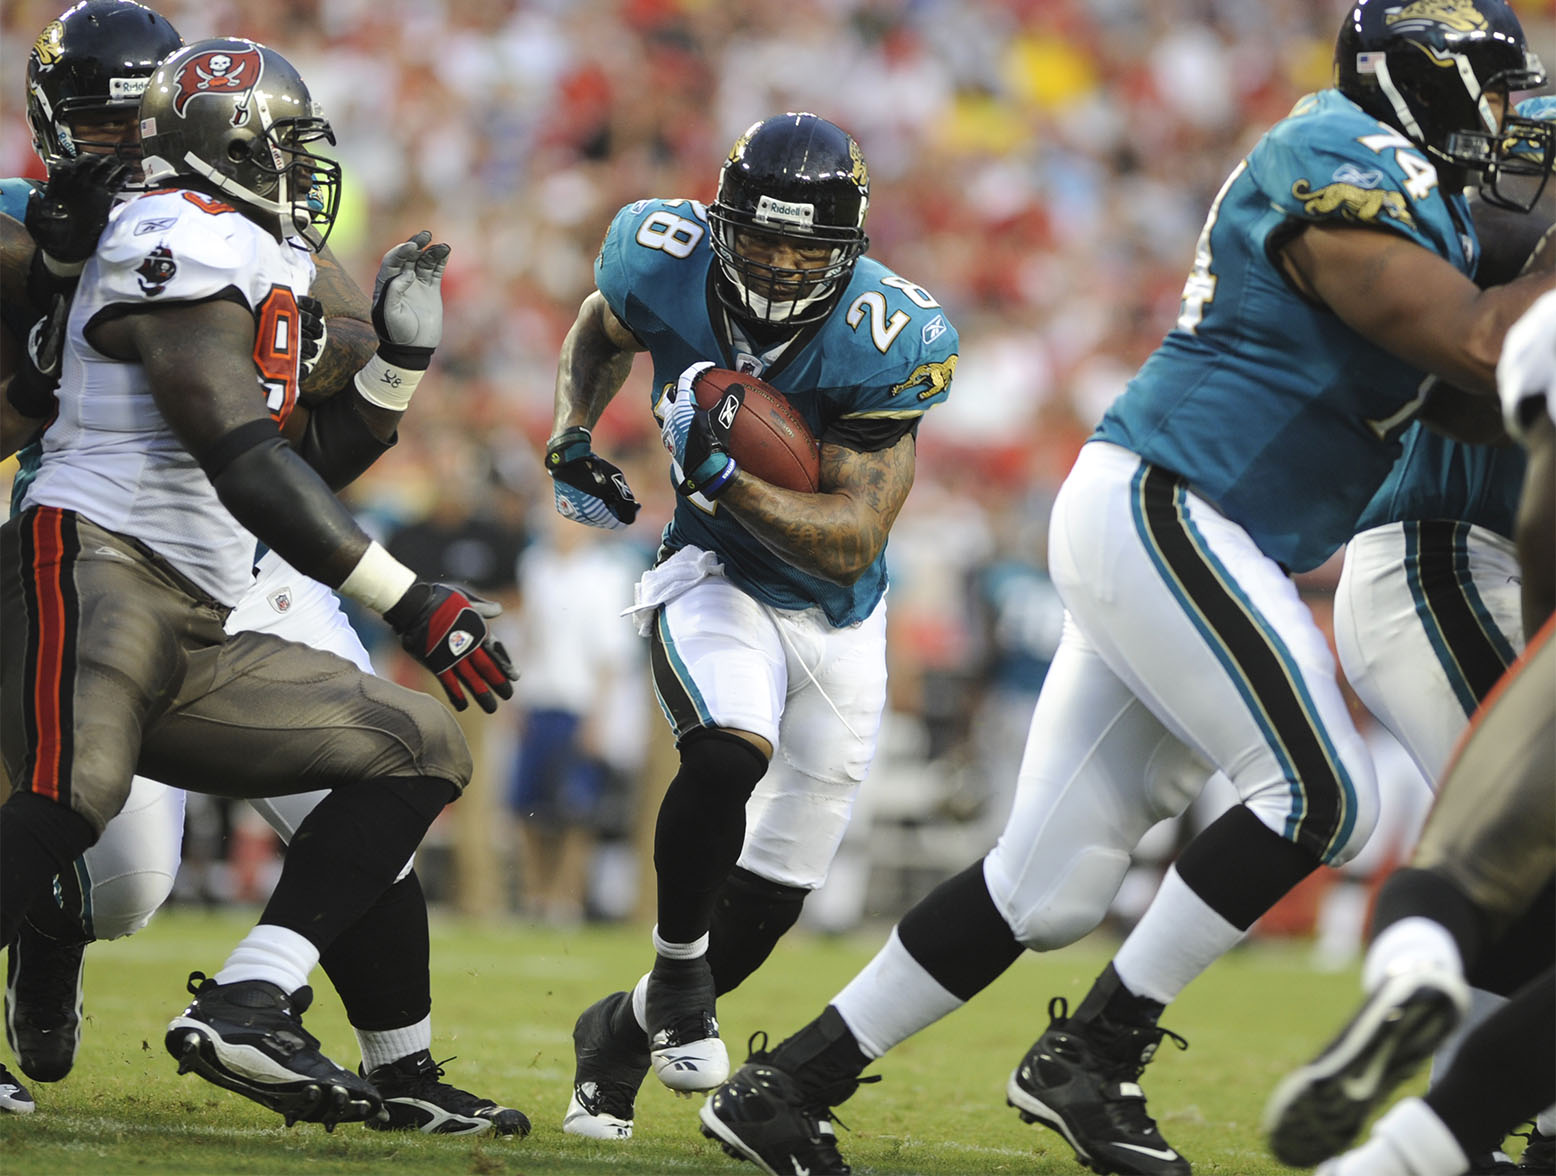 TAMPA, FL - AUGUST 23: Running back Fred Taylor #28 of the Jacksonville Jaguars rushes upfield against the Tampa Bay Buccaneers at Raymond James Stadium on August 23, 2008 in Tampa, Florida. (Photo by Al Messerschmidt/Getty Images)